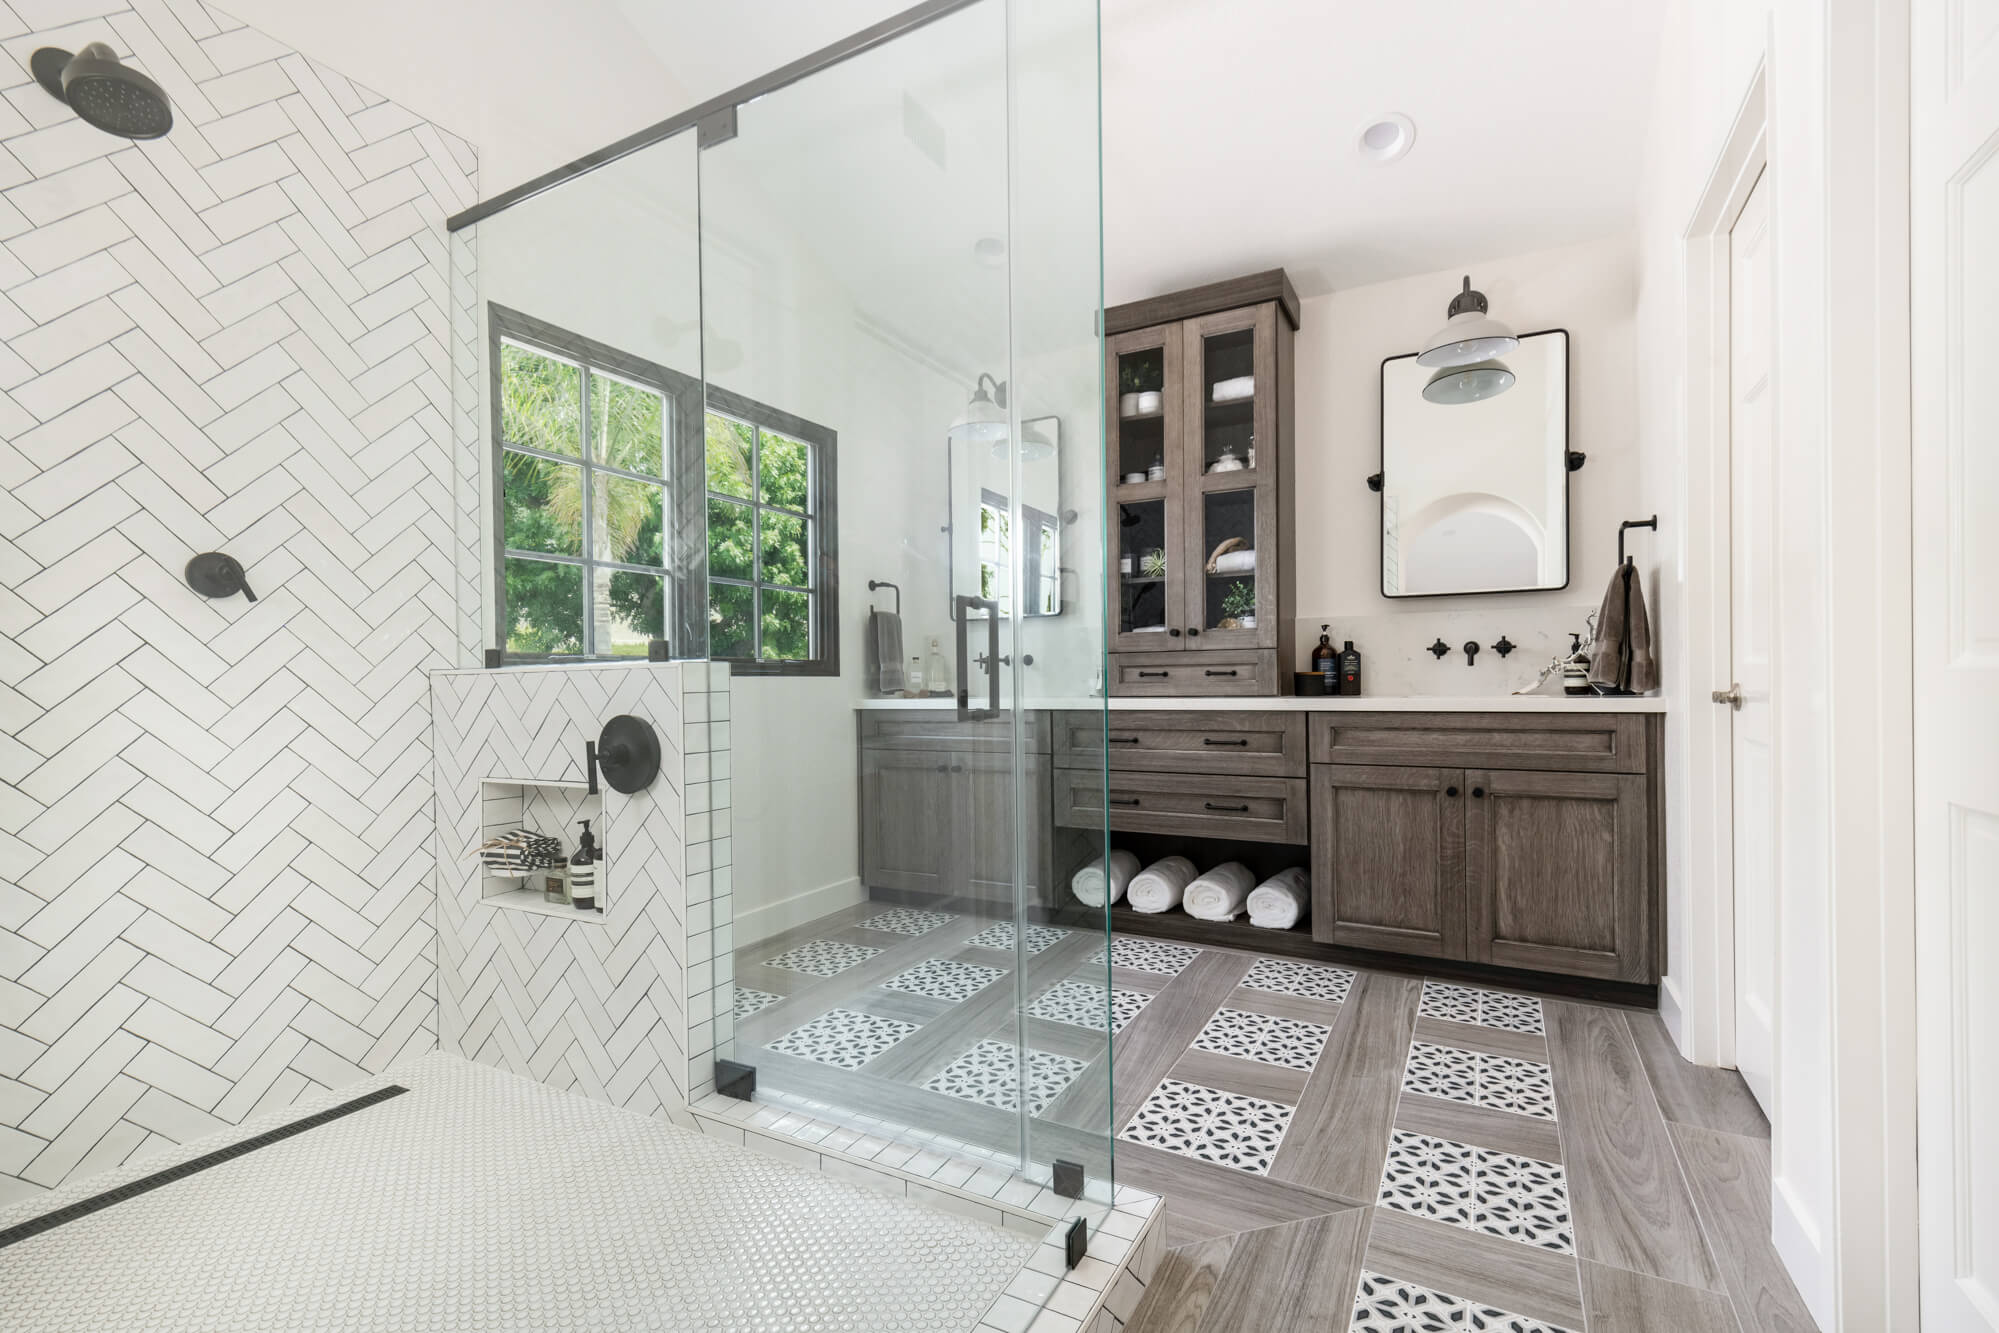 62 Beautiful Bathroom Tile Ideas for Walls, Floors, and More